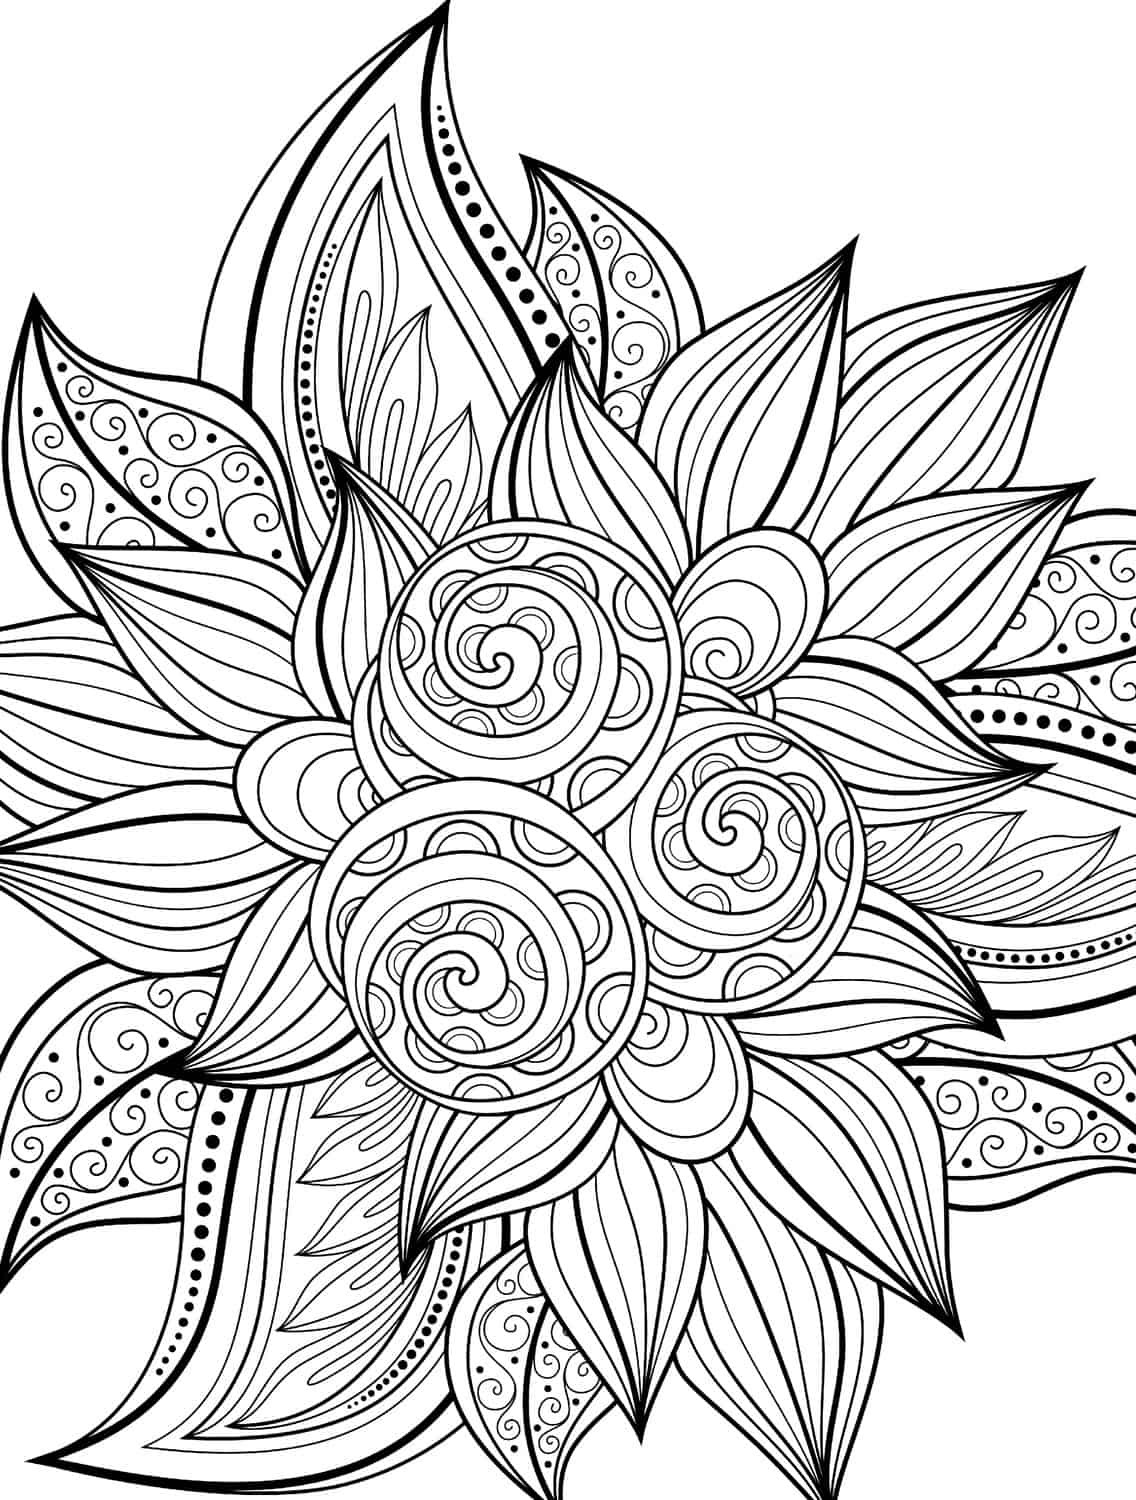 Printable Adult Coloring Pages
 10 Free Printable Holiday Adult Coloring Pages